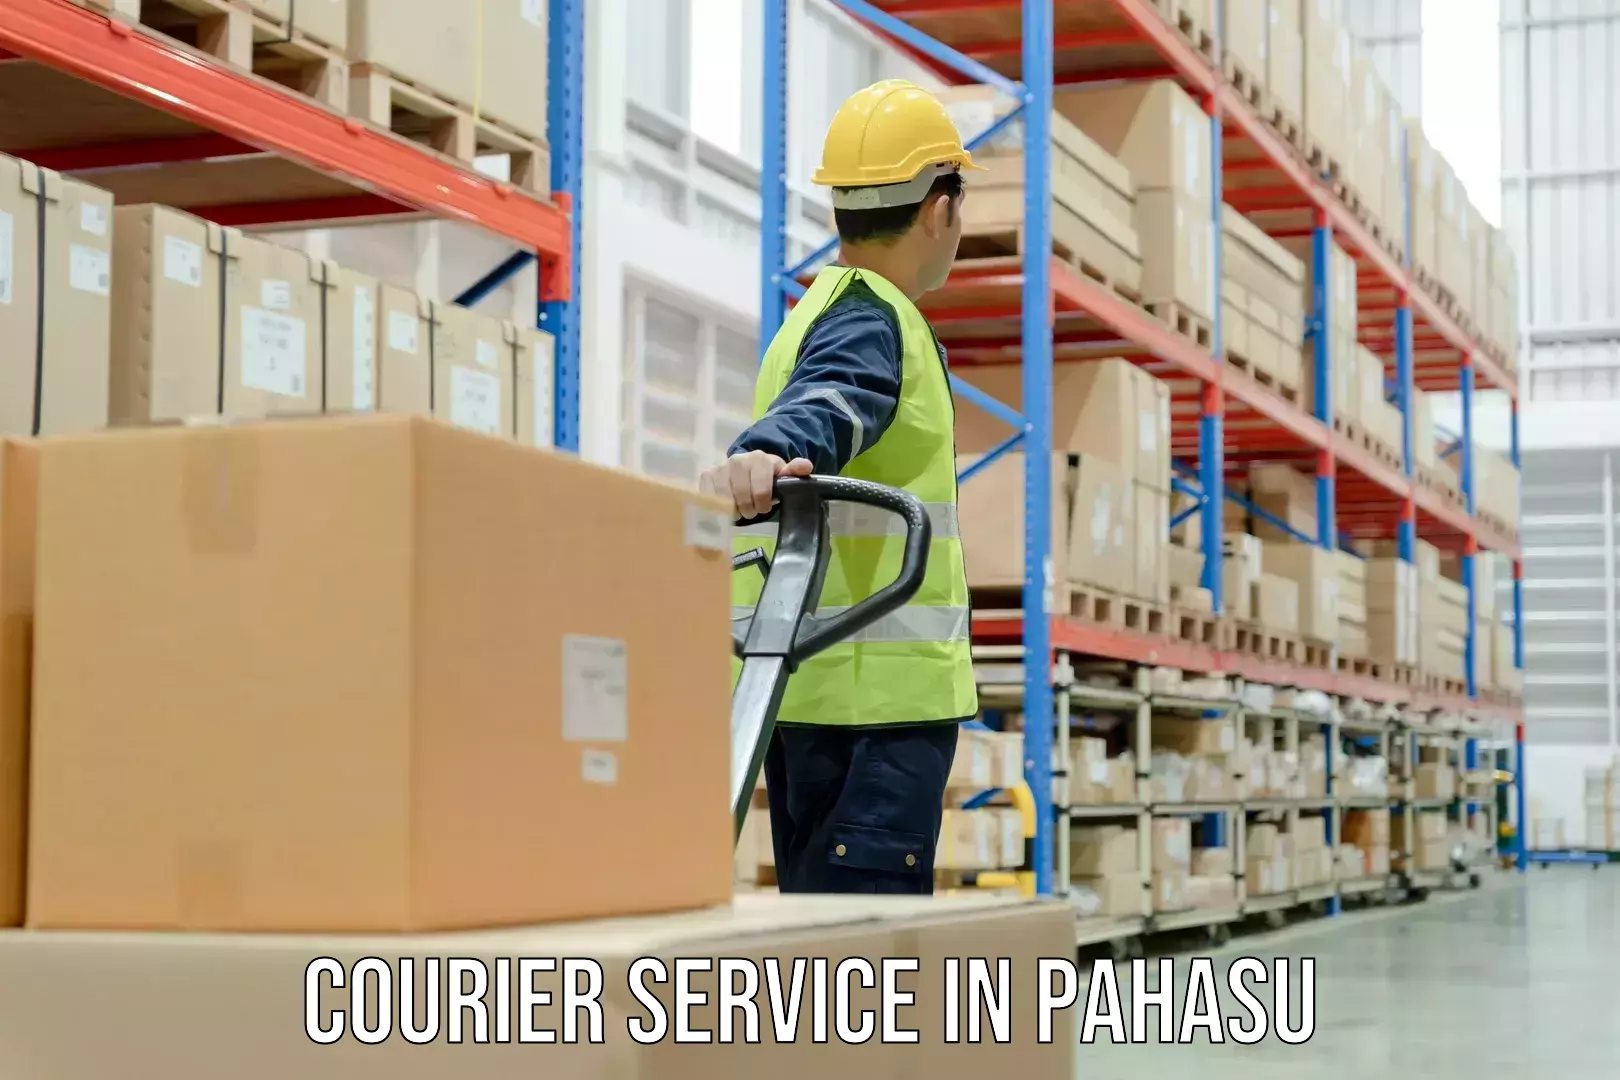 Personalized courier experiences in Pahasu